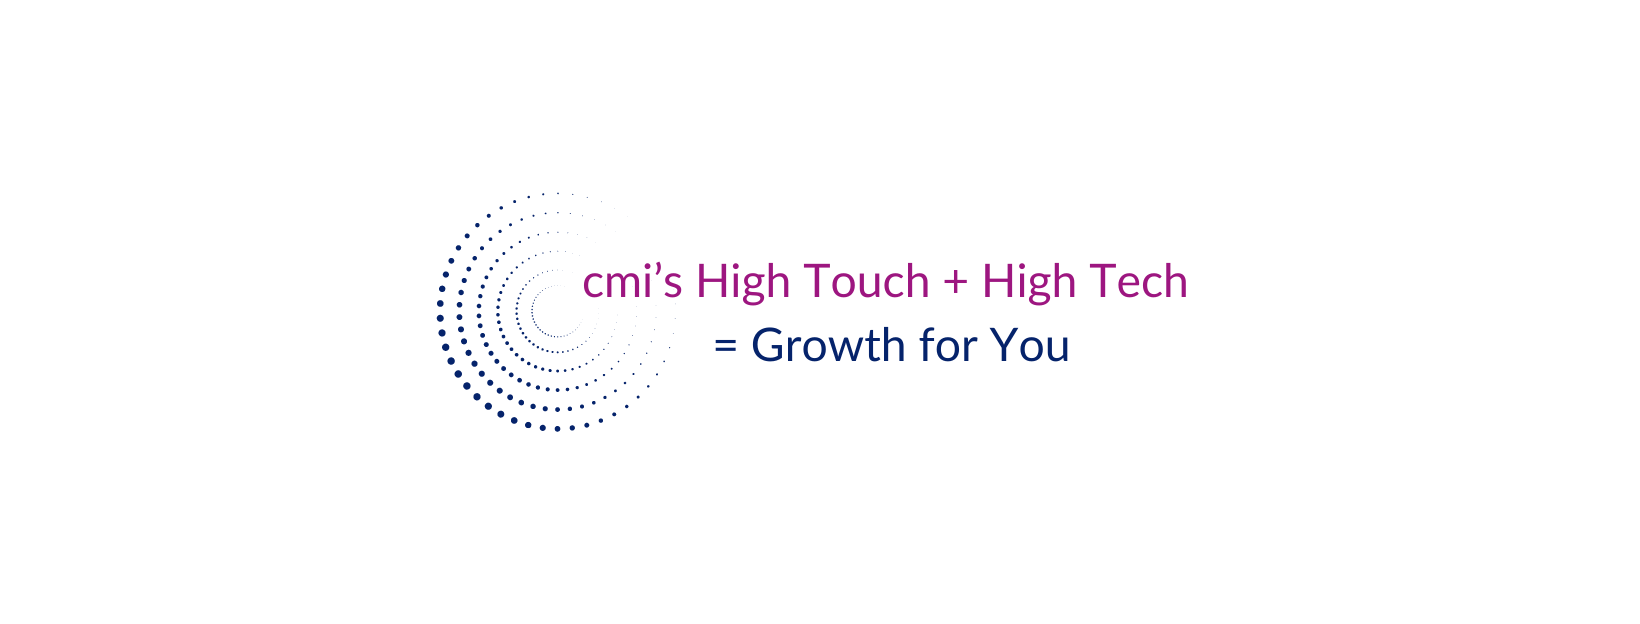 cmi’s High Touch + High Tech = Growth for You (4)